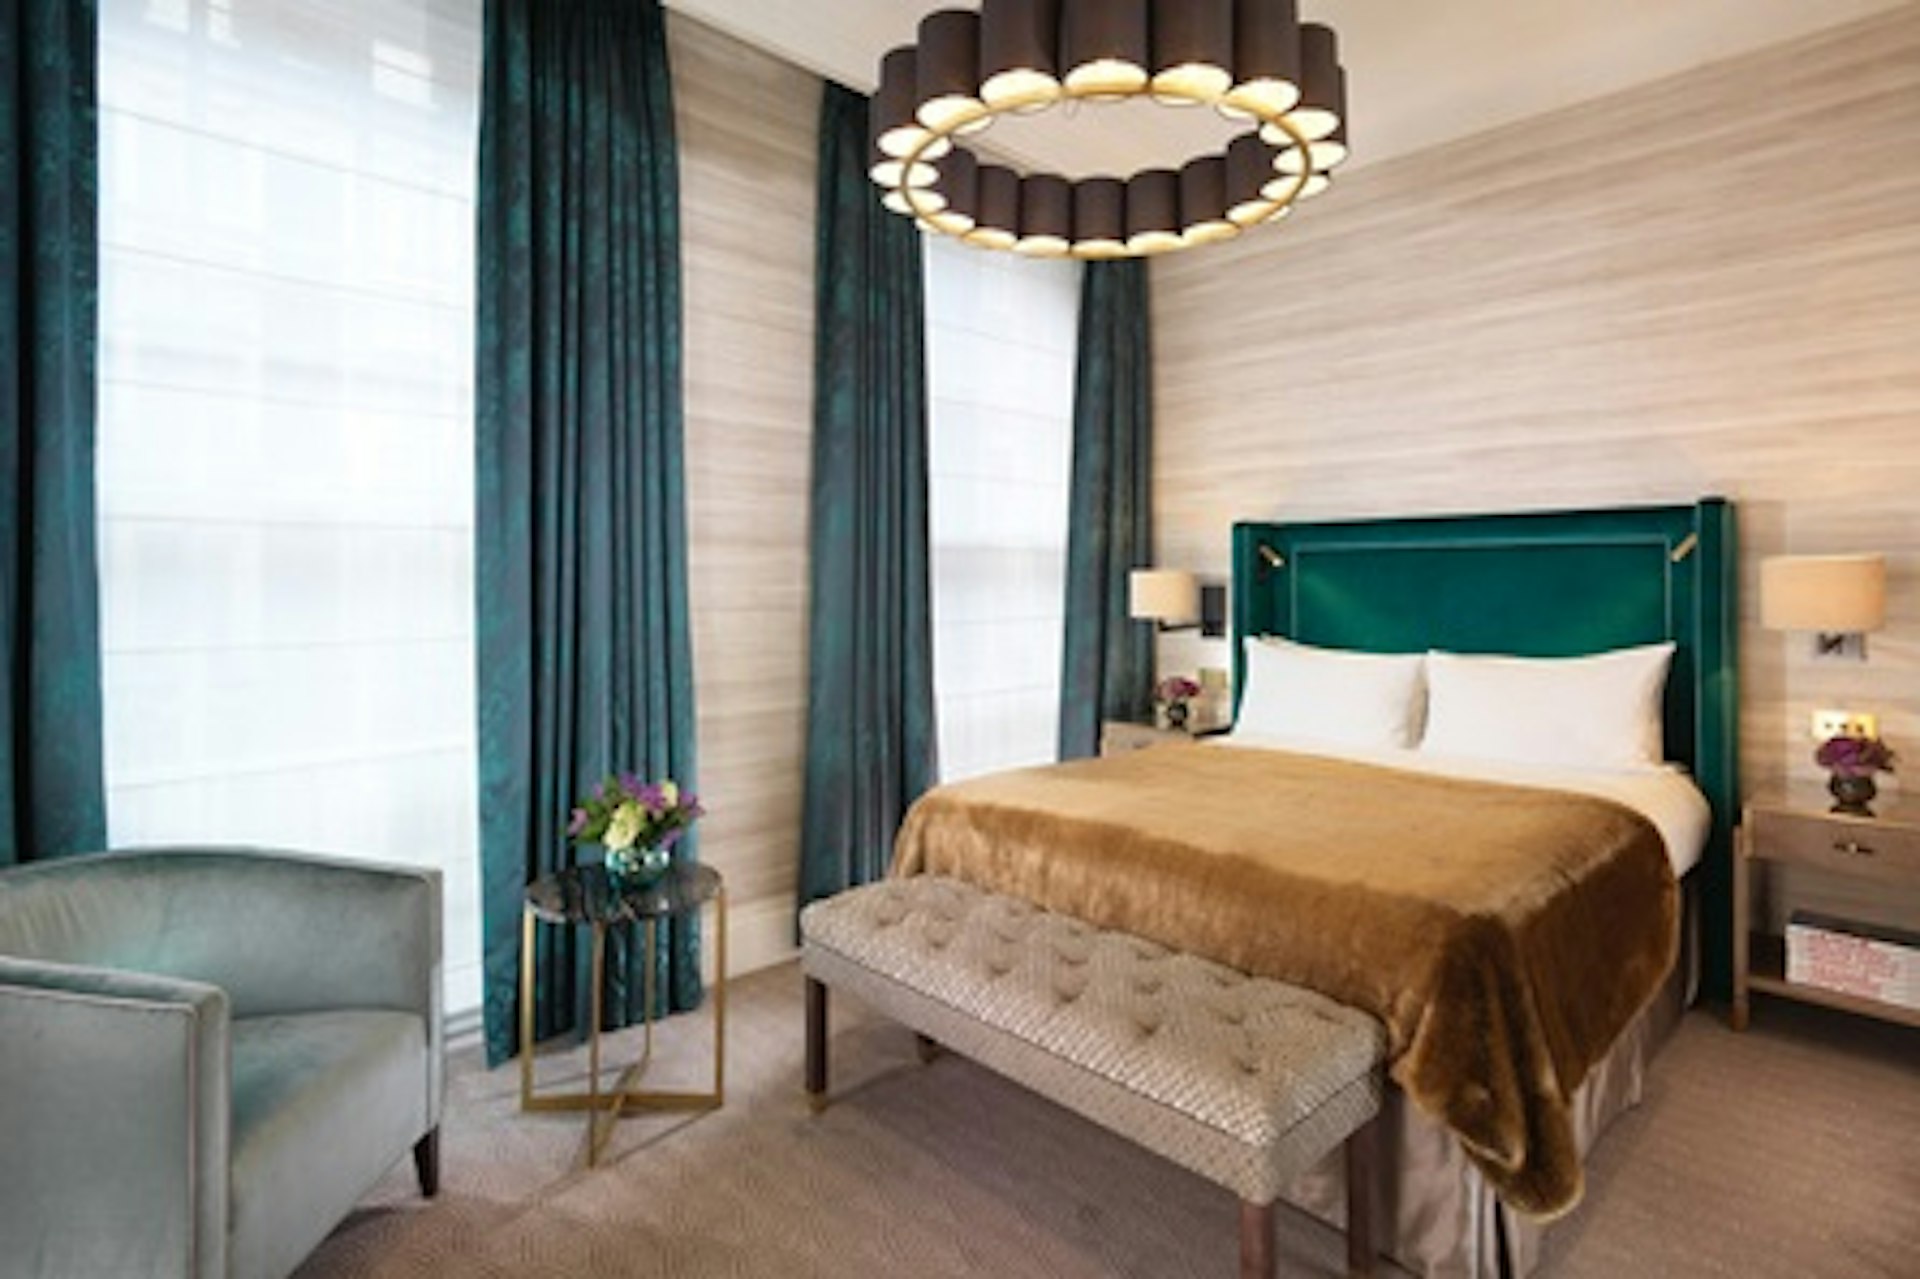 One Night London Luxury Escape for Two at the 5* Flemings Hotel, Mayfair 2